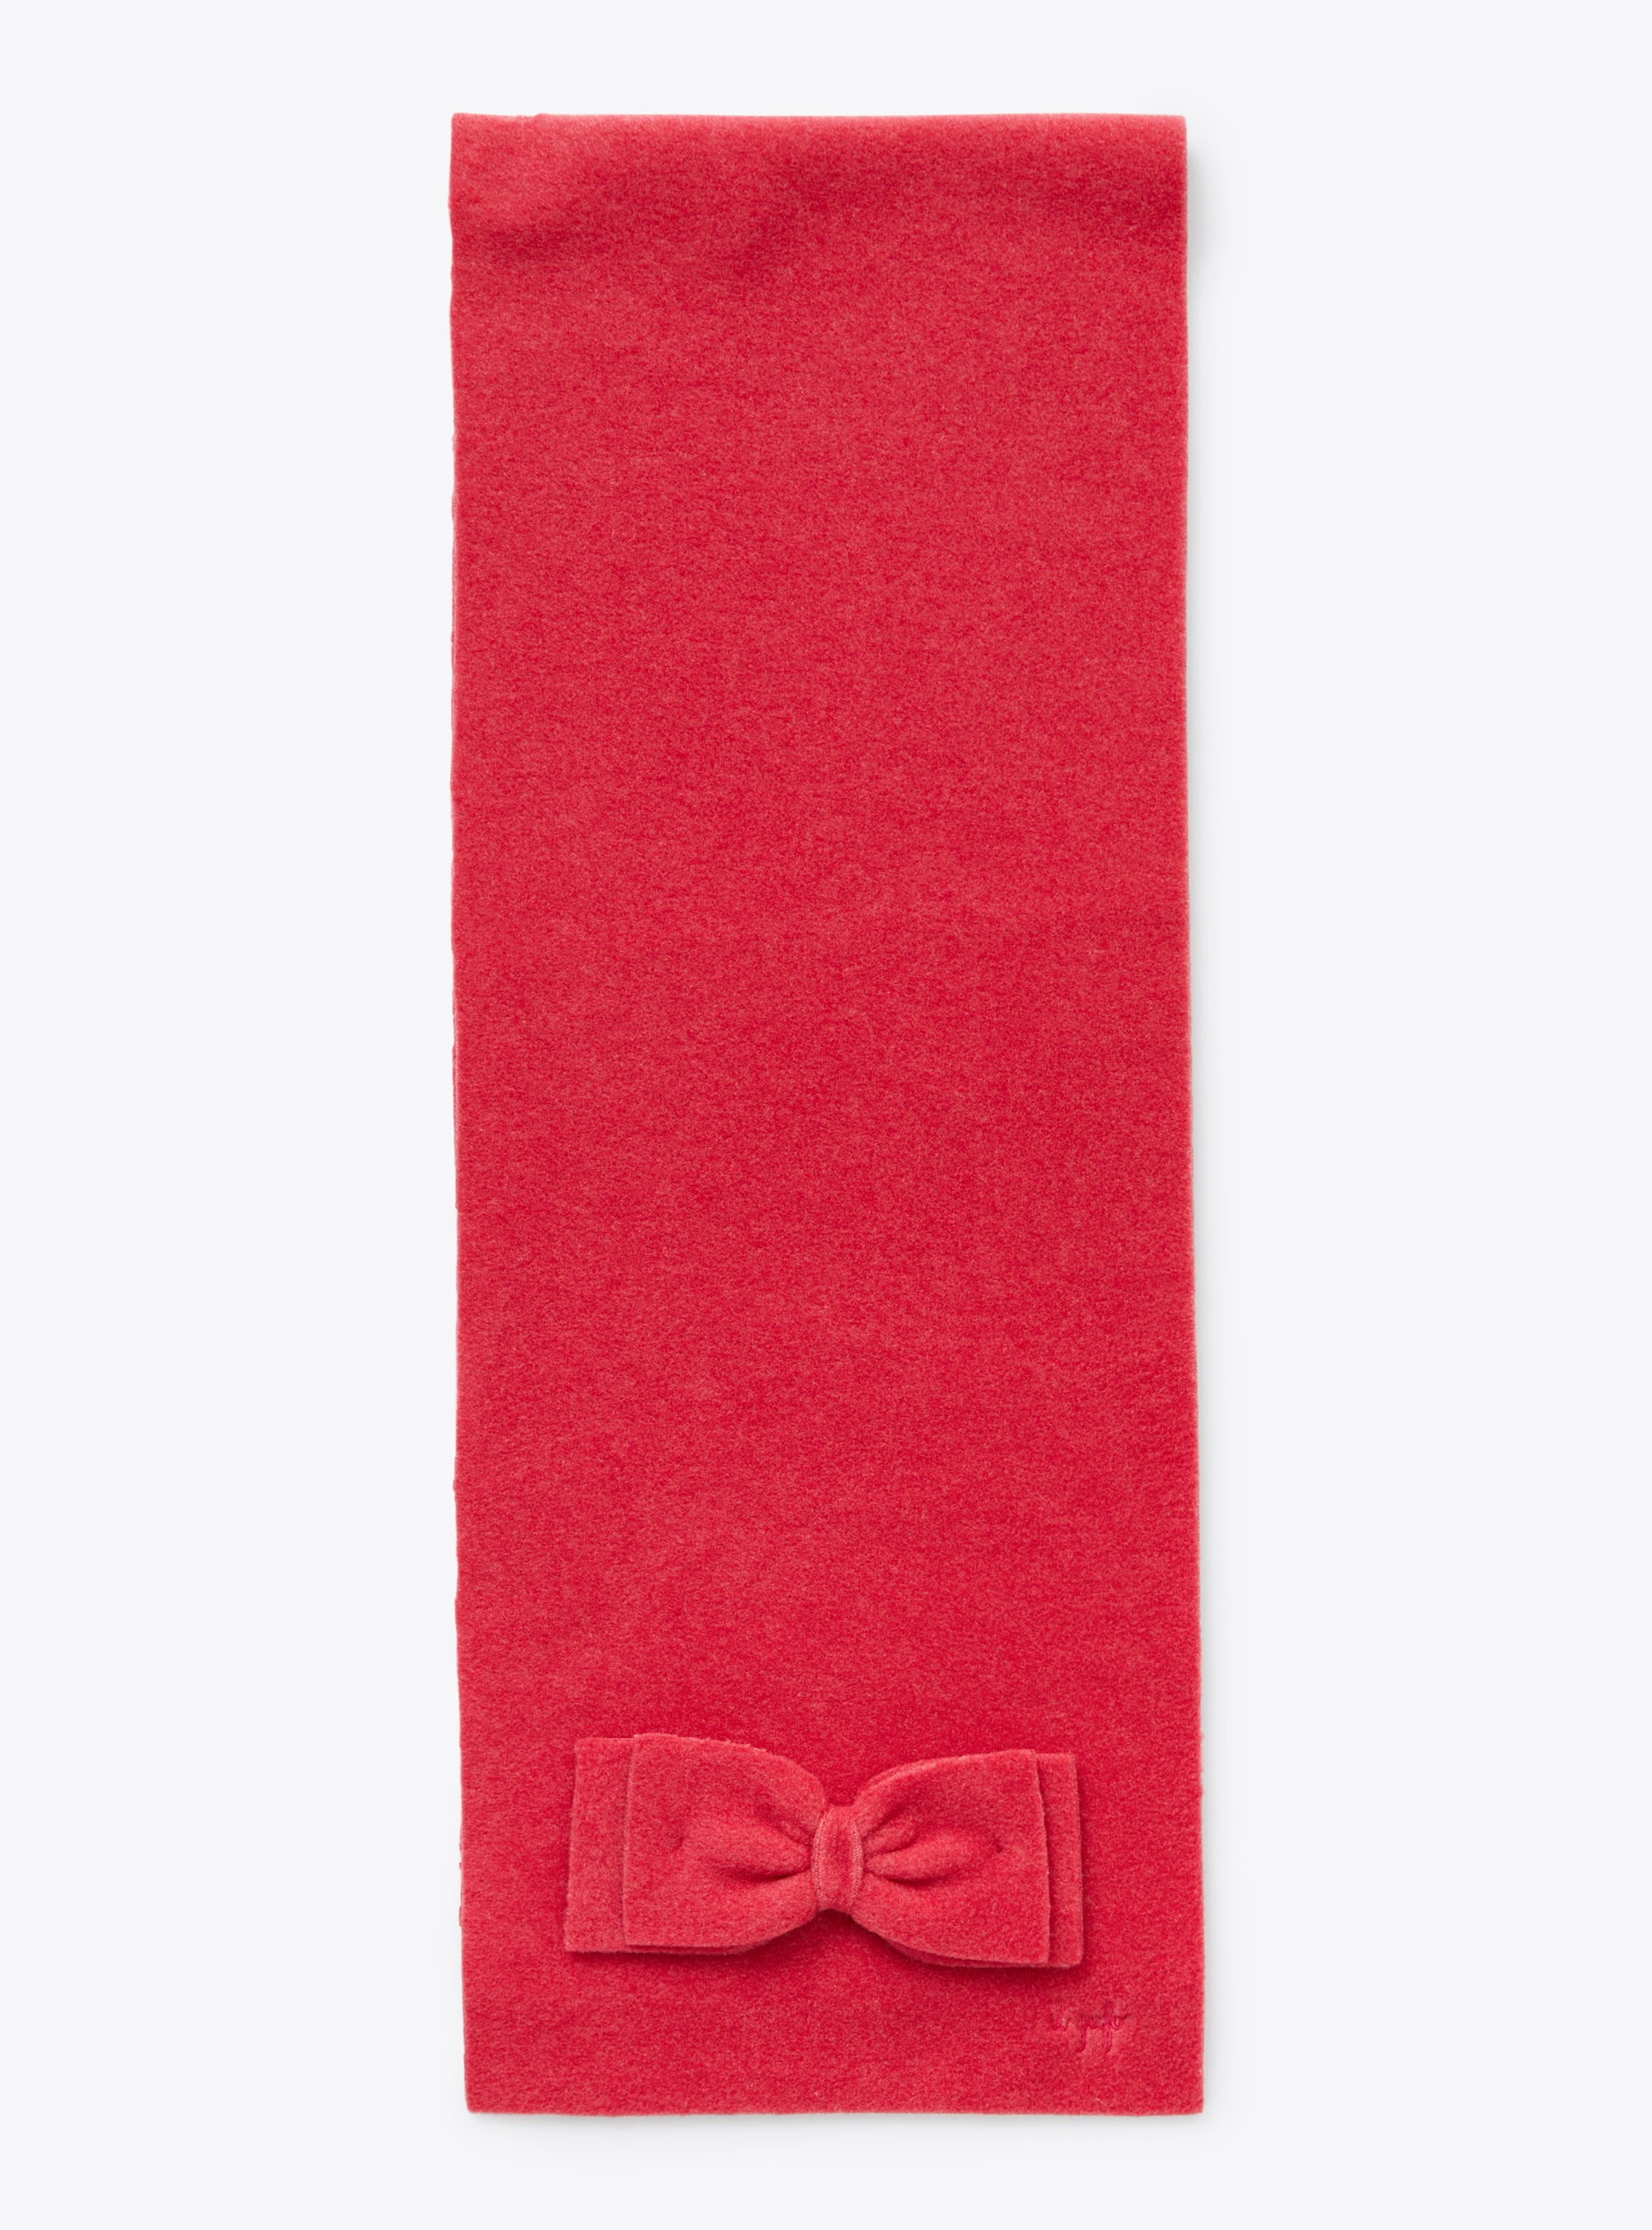 Fuchsia-pink fleece scarf with bow detail - Accessories - Il Gufo